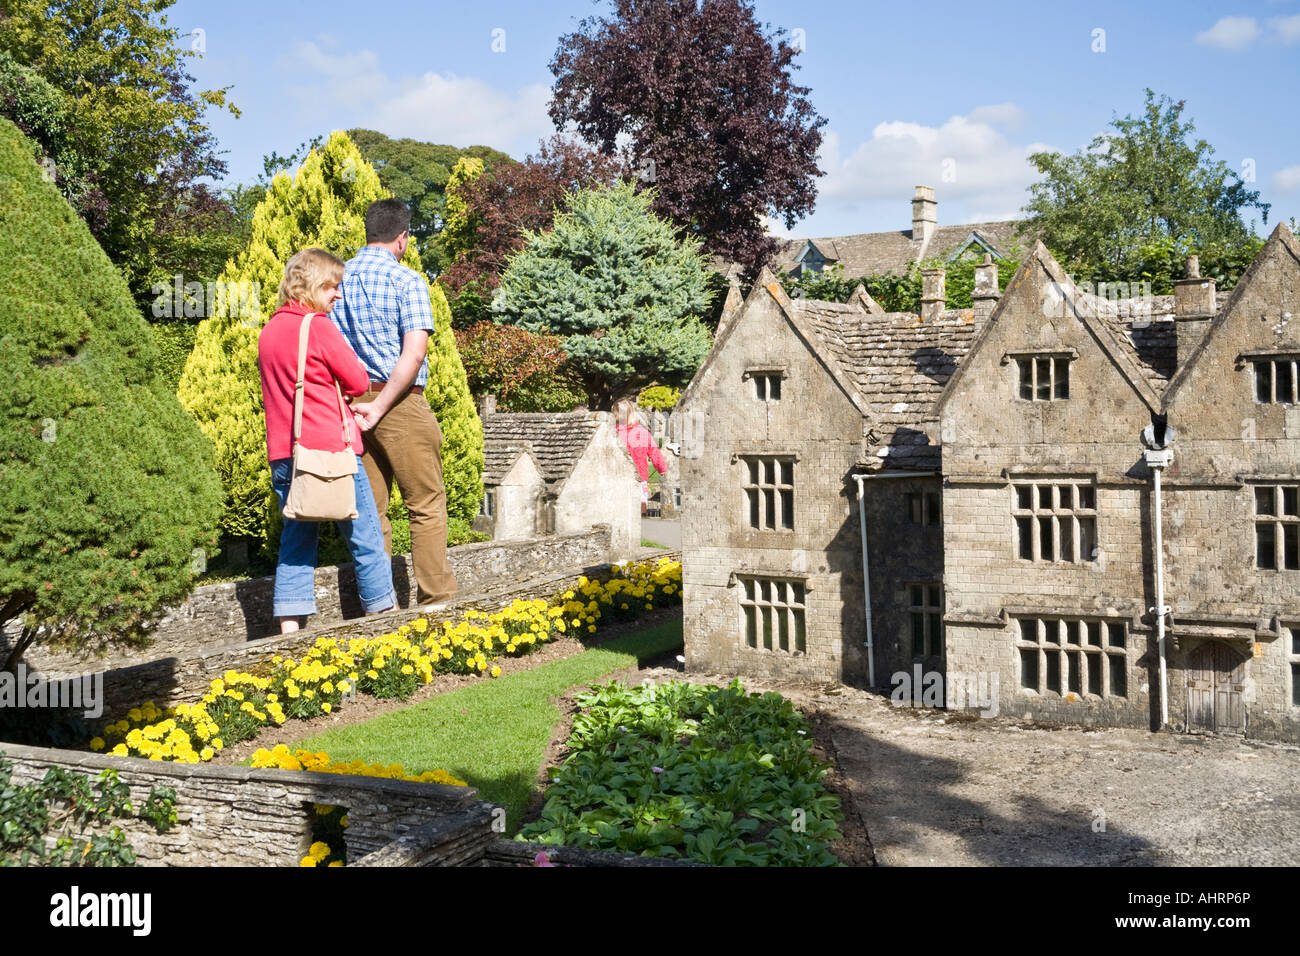 The Model Village behind the Old New Inn in the Cotswold village of Bourton on the Water, Gloucestershire UK Stock Photo